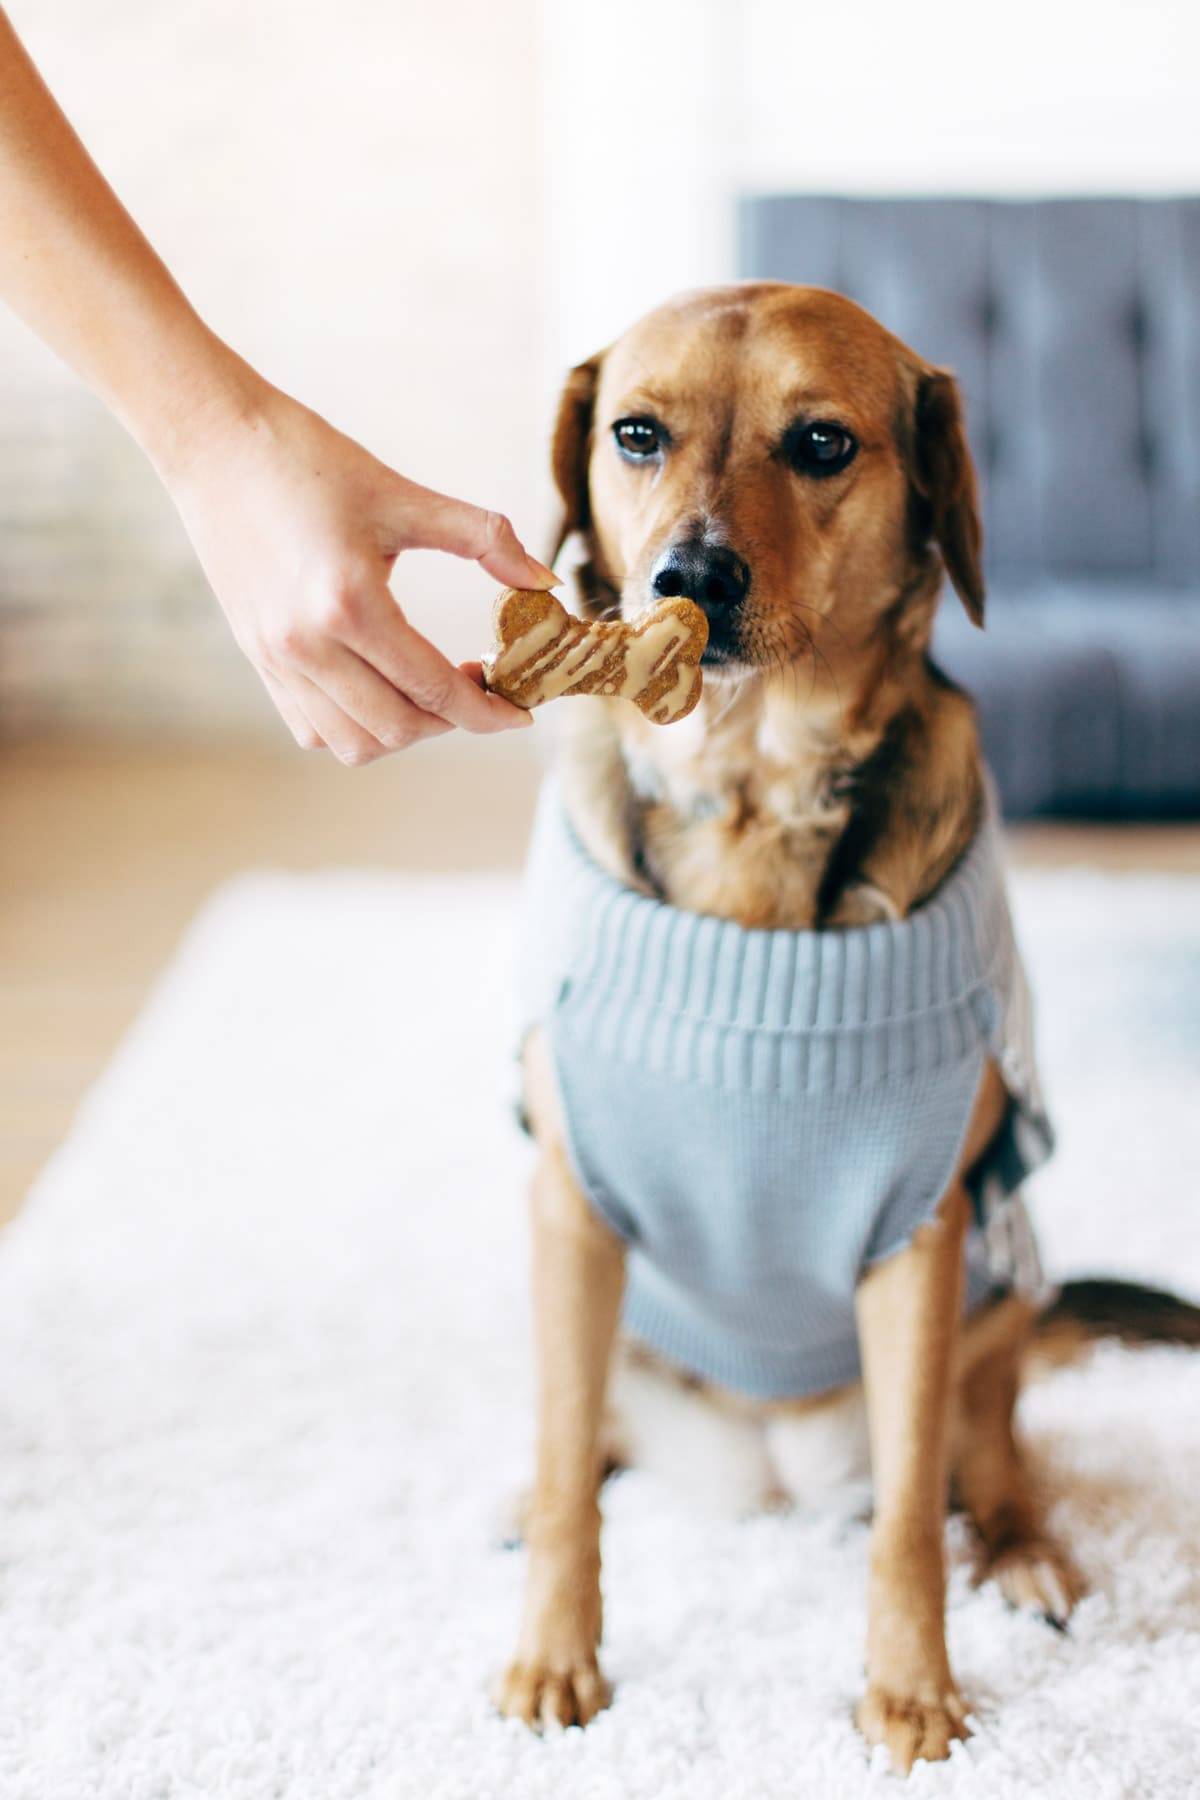 Homemade Dog Treats - 5 ingredient wholesome treats for your pup! | pinchofyum.com